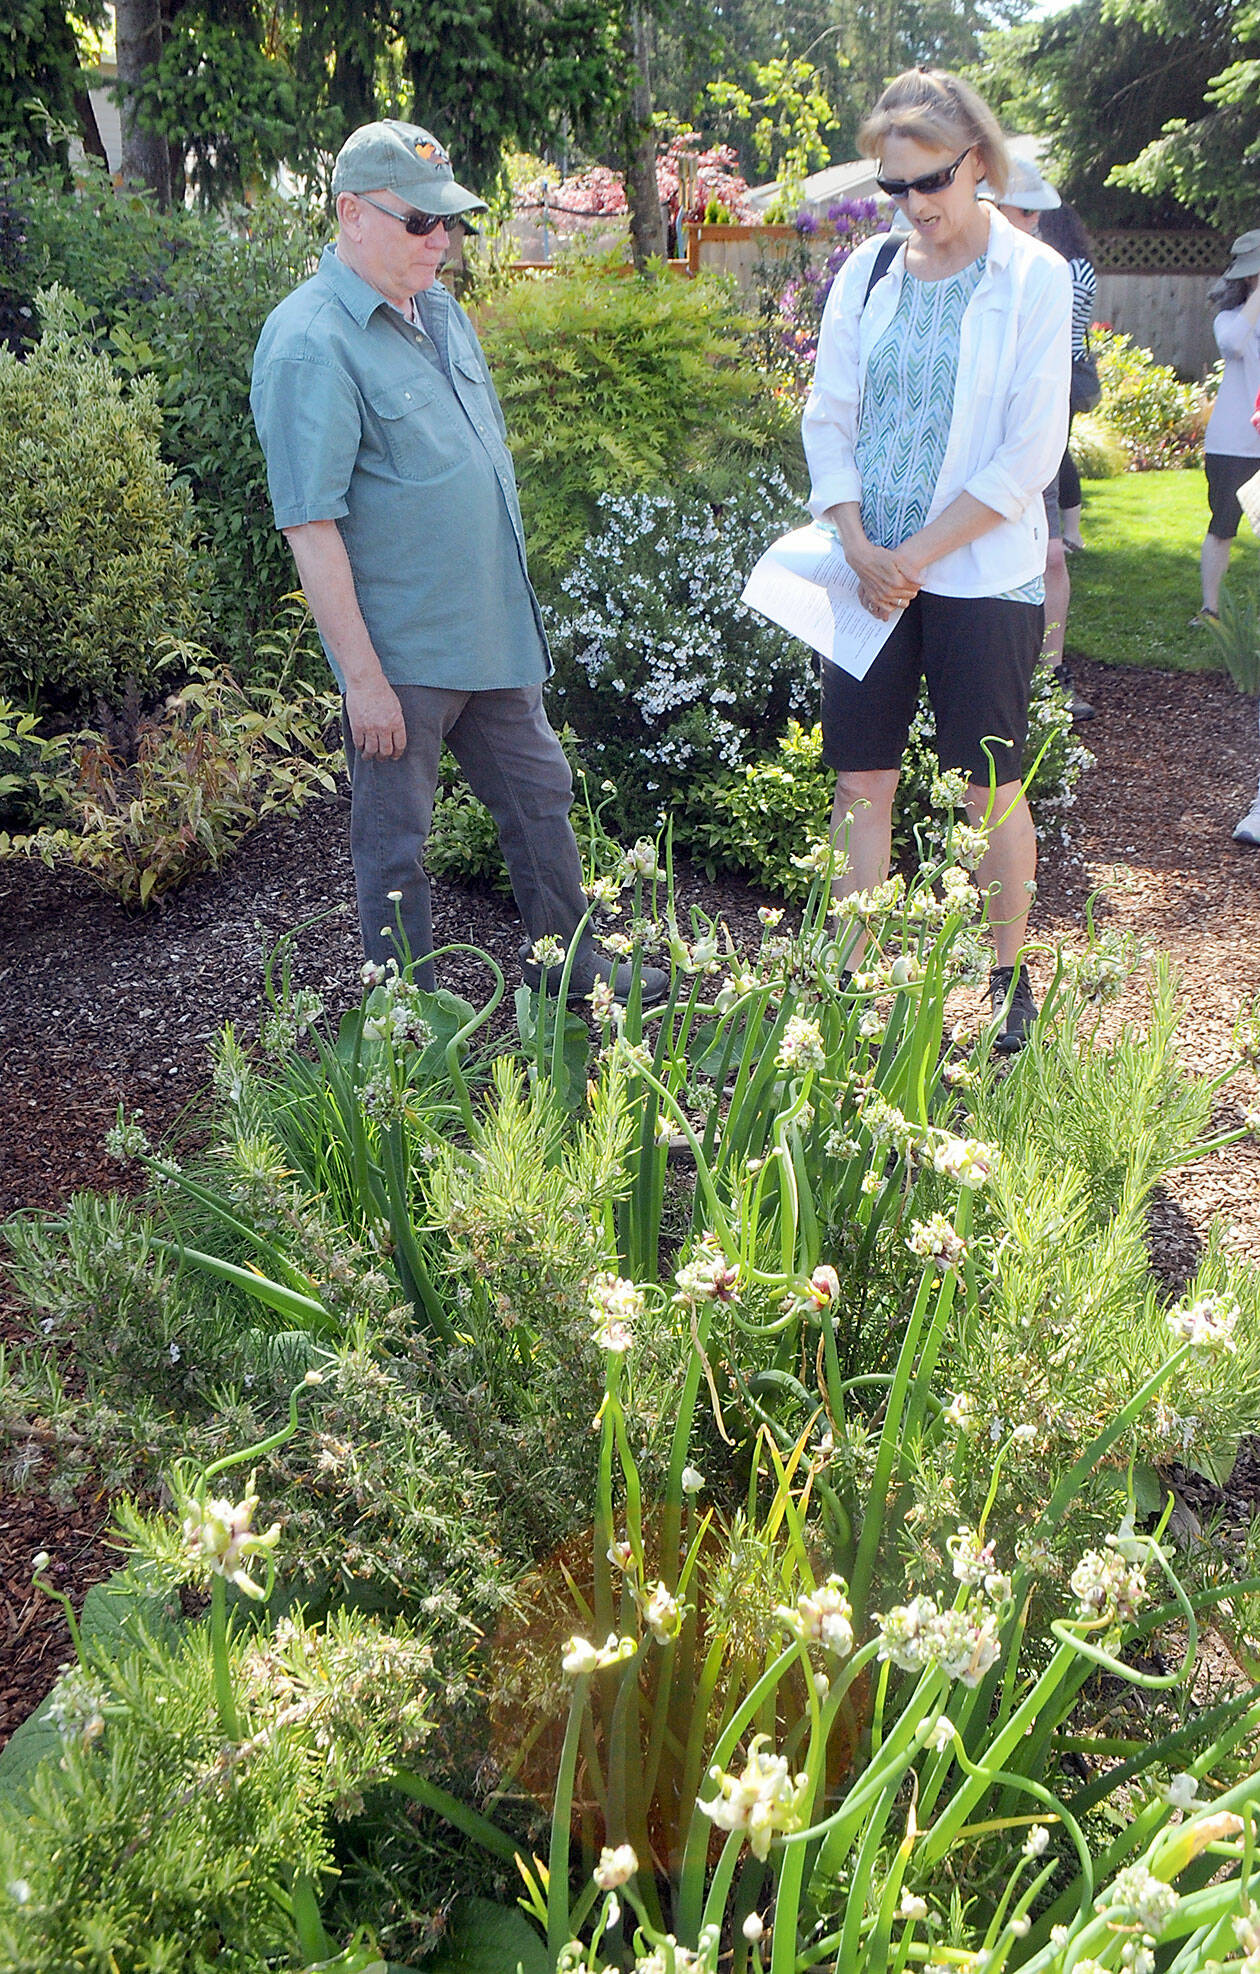 B.J. Bjork of Gig Harbor, right, talks with homeowner David Whiting about his bed of walking Egyptian onions during Saturday’s 27th annual Petals & Pathways Home Garden Tour. The event, organized by the Master Gardener Foundation of Clallam County, featured six locations in Port Angeles and along State Highway 112 selected for their beauty and variety. (Keith Thorpe/Peninsula Daily News)